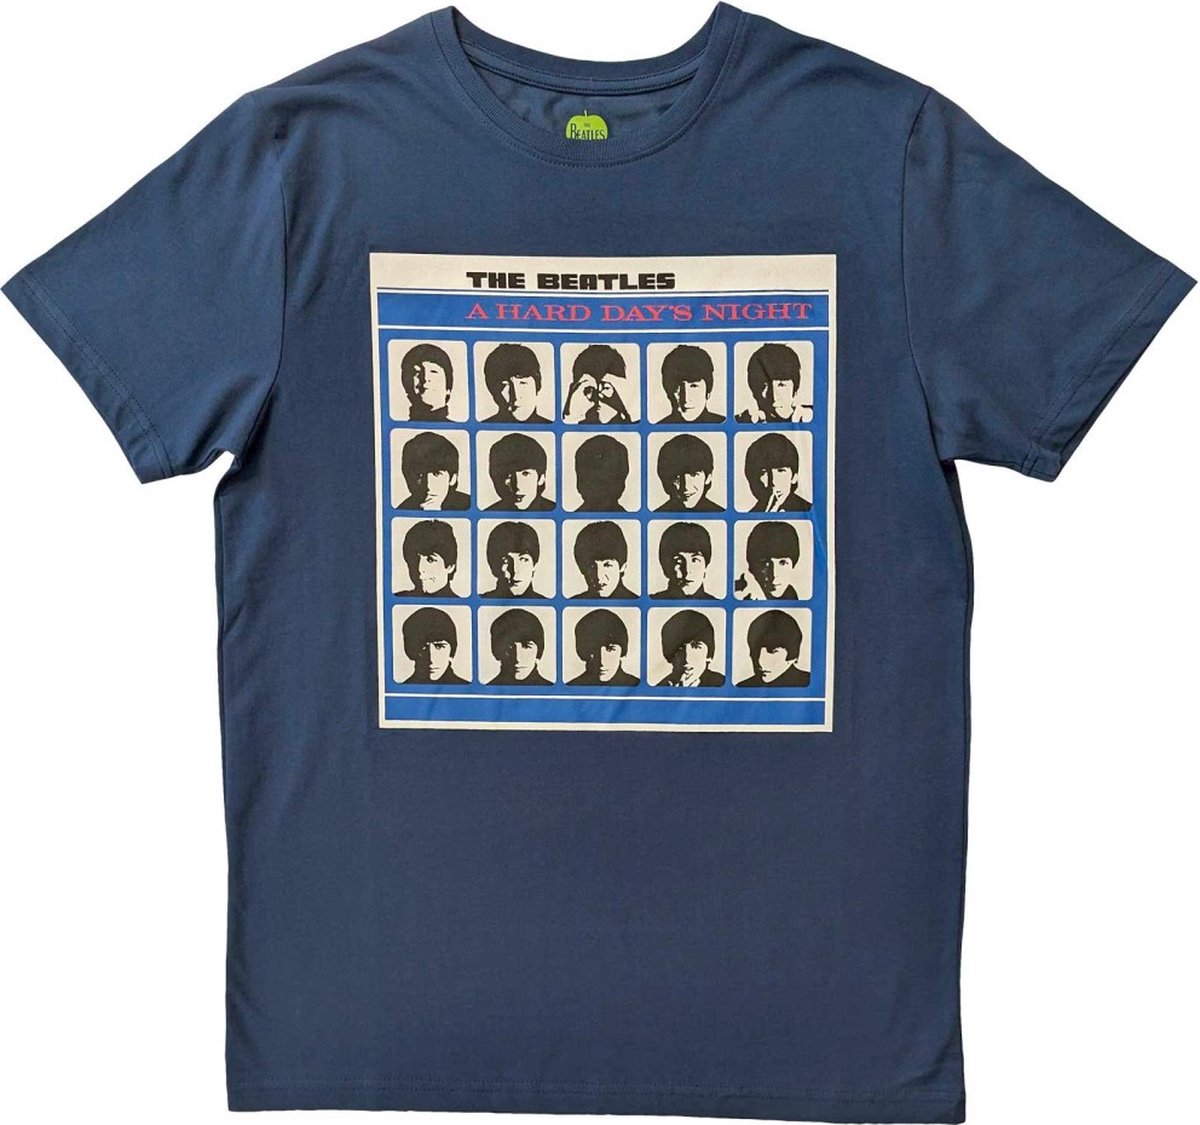 The Beatles - A Hard Day's Night Album Cover Heren T-shirt - L - Blauw